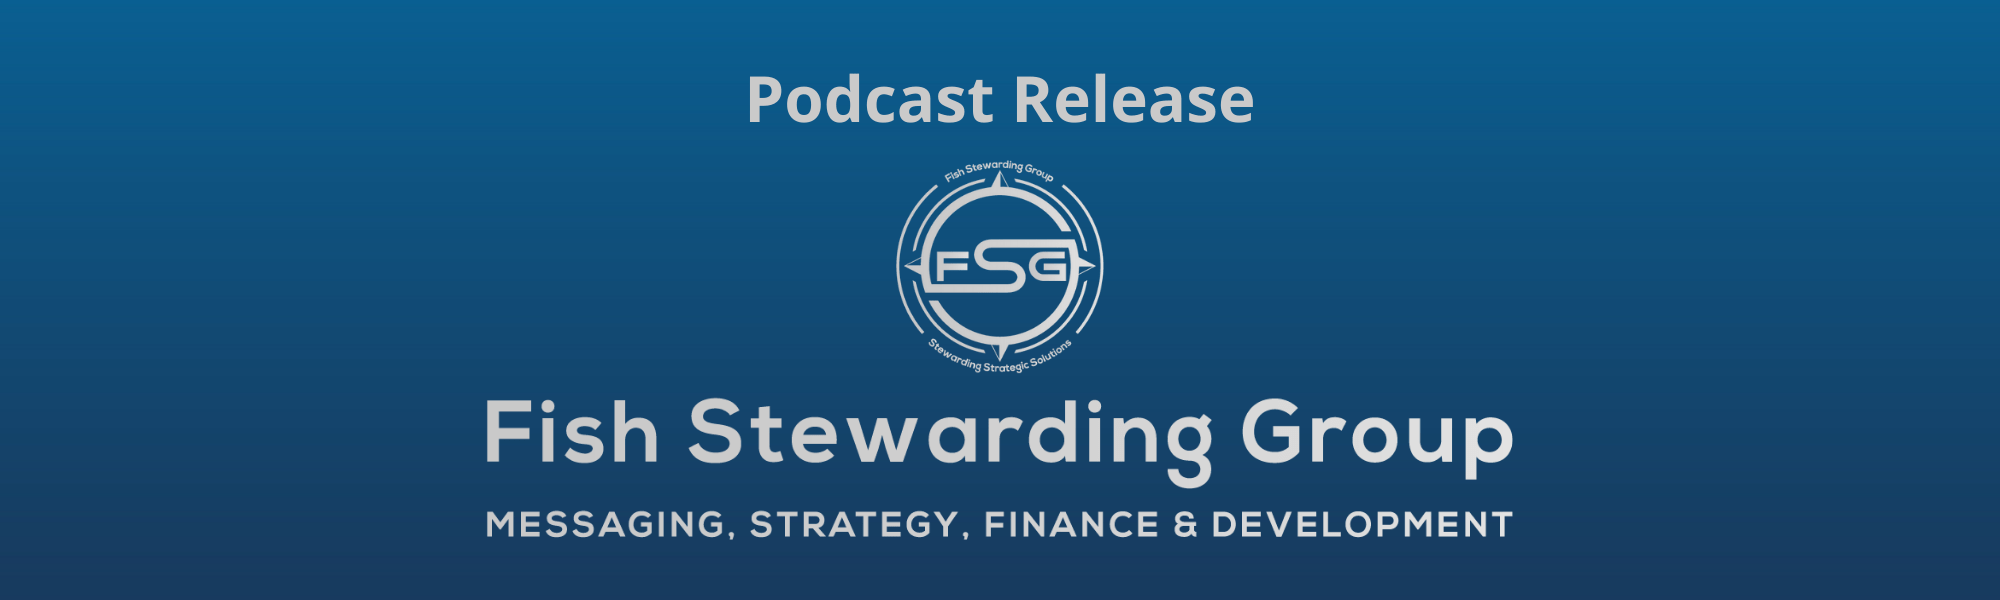 A thin rectangular Footer graphic for the Podcast Release page. The background is a blue gradient color that goes from a dark blue on the bottom to a lighter blue on top. The text in gray on top reads Podcast Release. The text in gray on the bottom center reads: Fish Stewarding Group and beneath that, the text reads Messaging, Strategy, Finance and Development. In the center above the text is the FSG logo in gray. The logo has the letters FSG in the middle with a circle with four pointed arrows facing north, south, east and west with the S connected to that circle. Four rounded lines make the next circle of the circle and the last layer is a thin circle with the text on the Bottom that reads Stewarding Strategist Solutions and on top, the text reads Fish Stewarding Group.